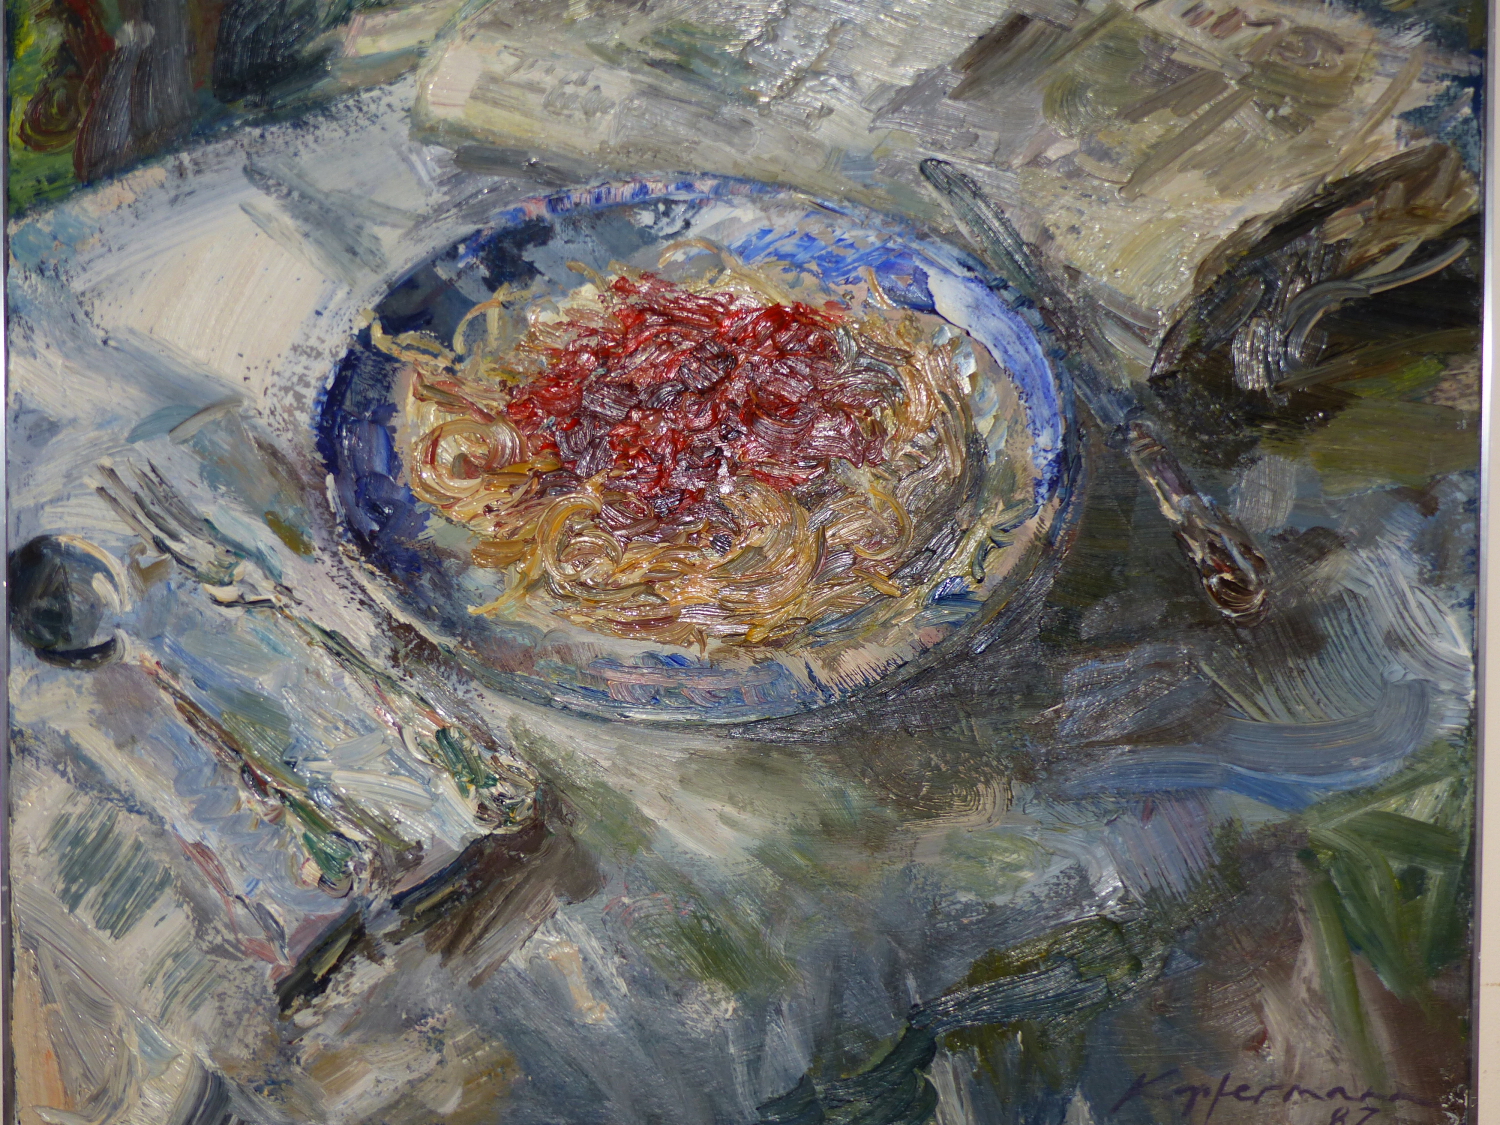 (ARR)KOPFERMAN, STILL LIFE OF PASTA AND NEWSPAPER, SIGNED AND DATED '87, OIL ON CANVAS, 61 X